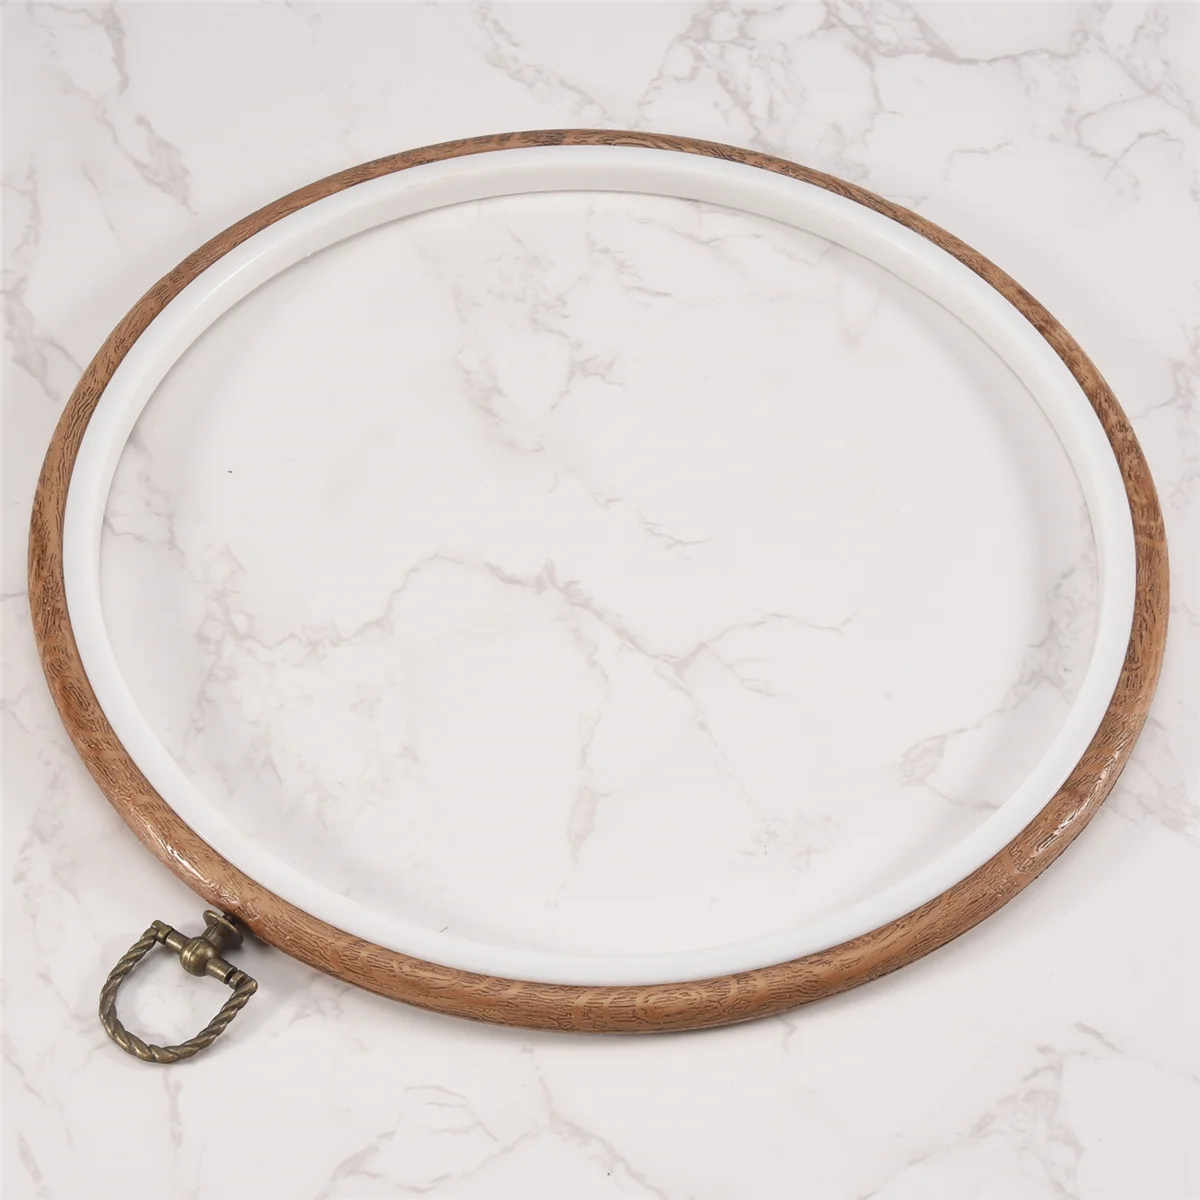 

3 Pieces 10 inch 26cm Embroidery Ring Cross Stitch No Slip Hoops Set Imitated Wood Display Frame Circle Embroidery Kits